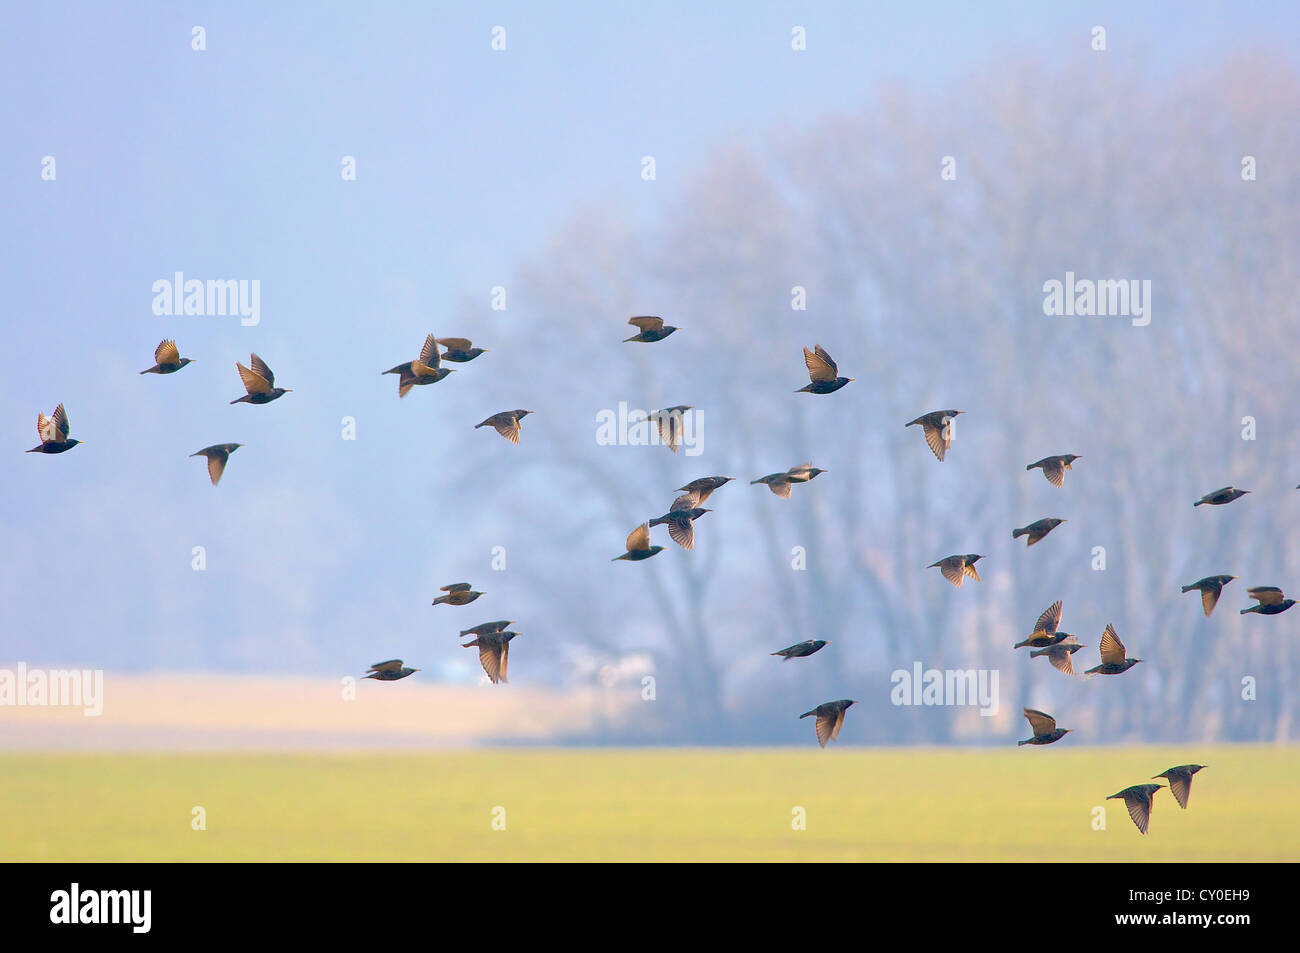 Flock of birds flying over a country field Stock Photo